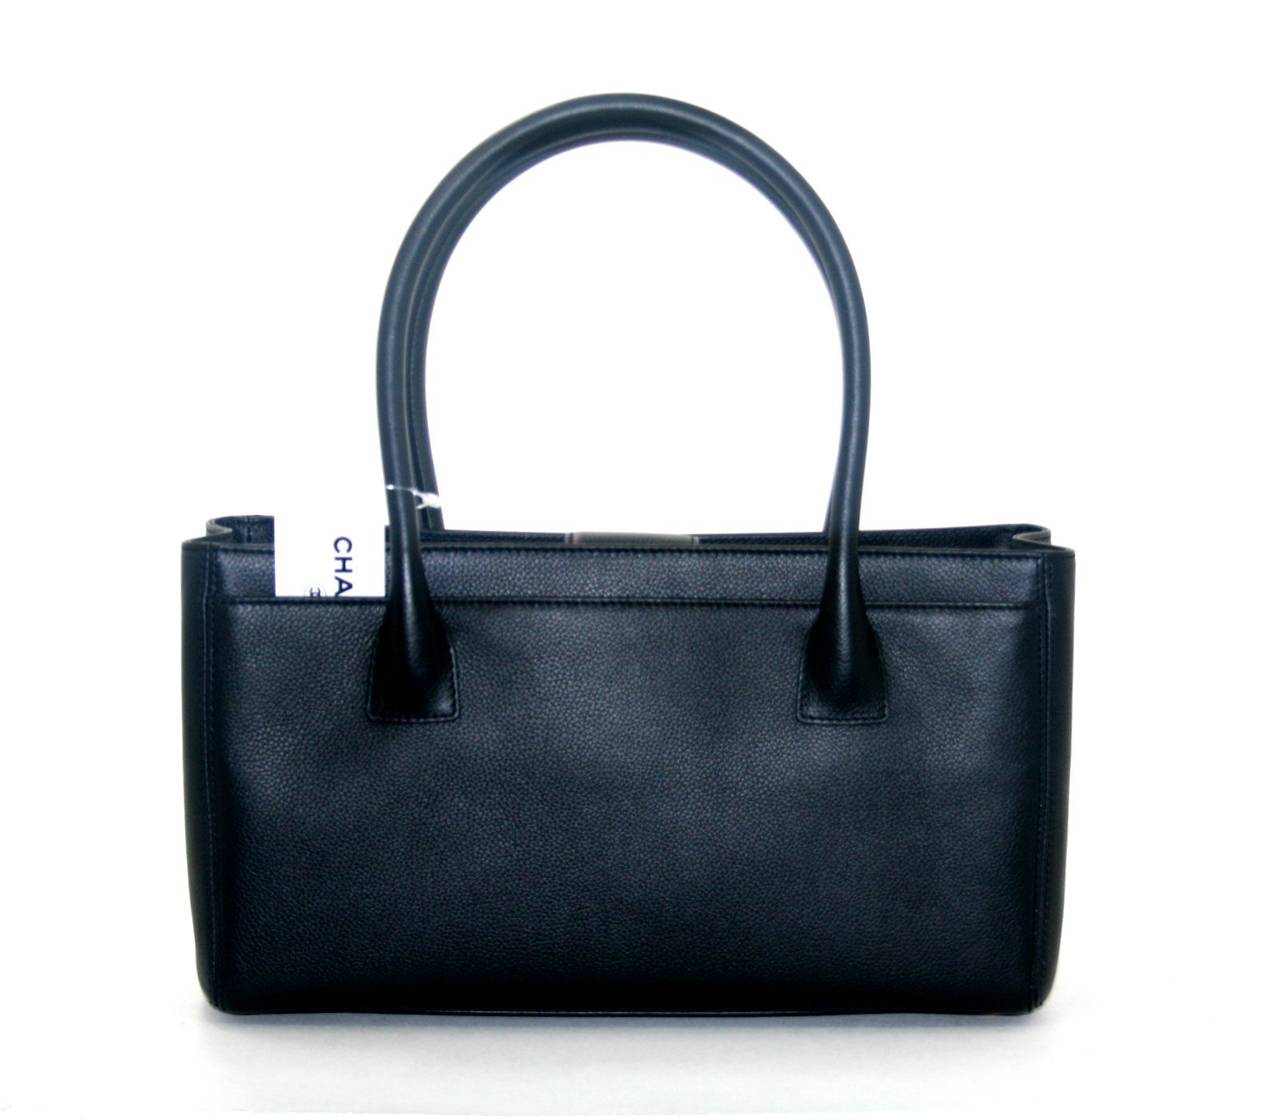 In pristine condition, this Black Deerskin Small Cerf Tote from the Chanel Classics Collection is an unworn former store display. The Mini Cerf currently retails for over $3,000.00 with taxes and the price is expected to increase in the near future.